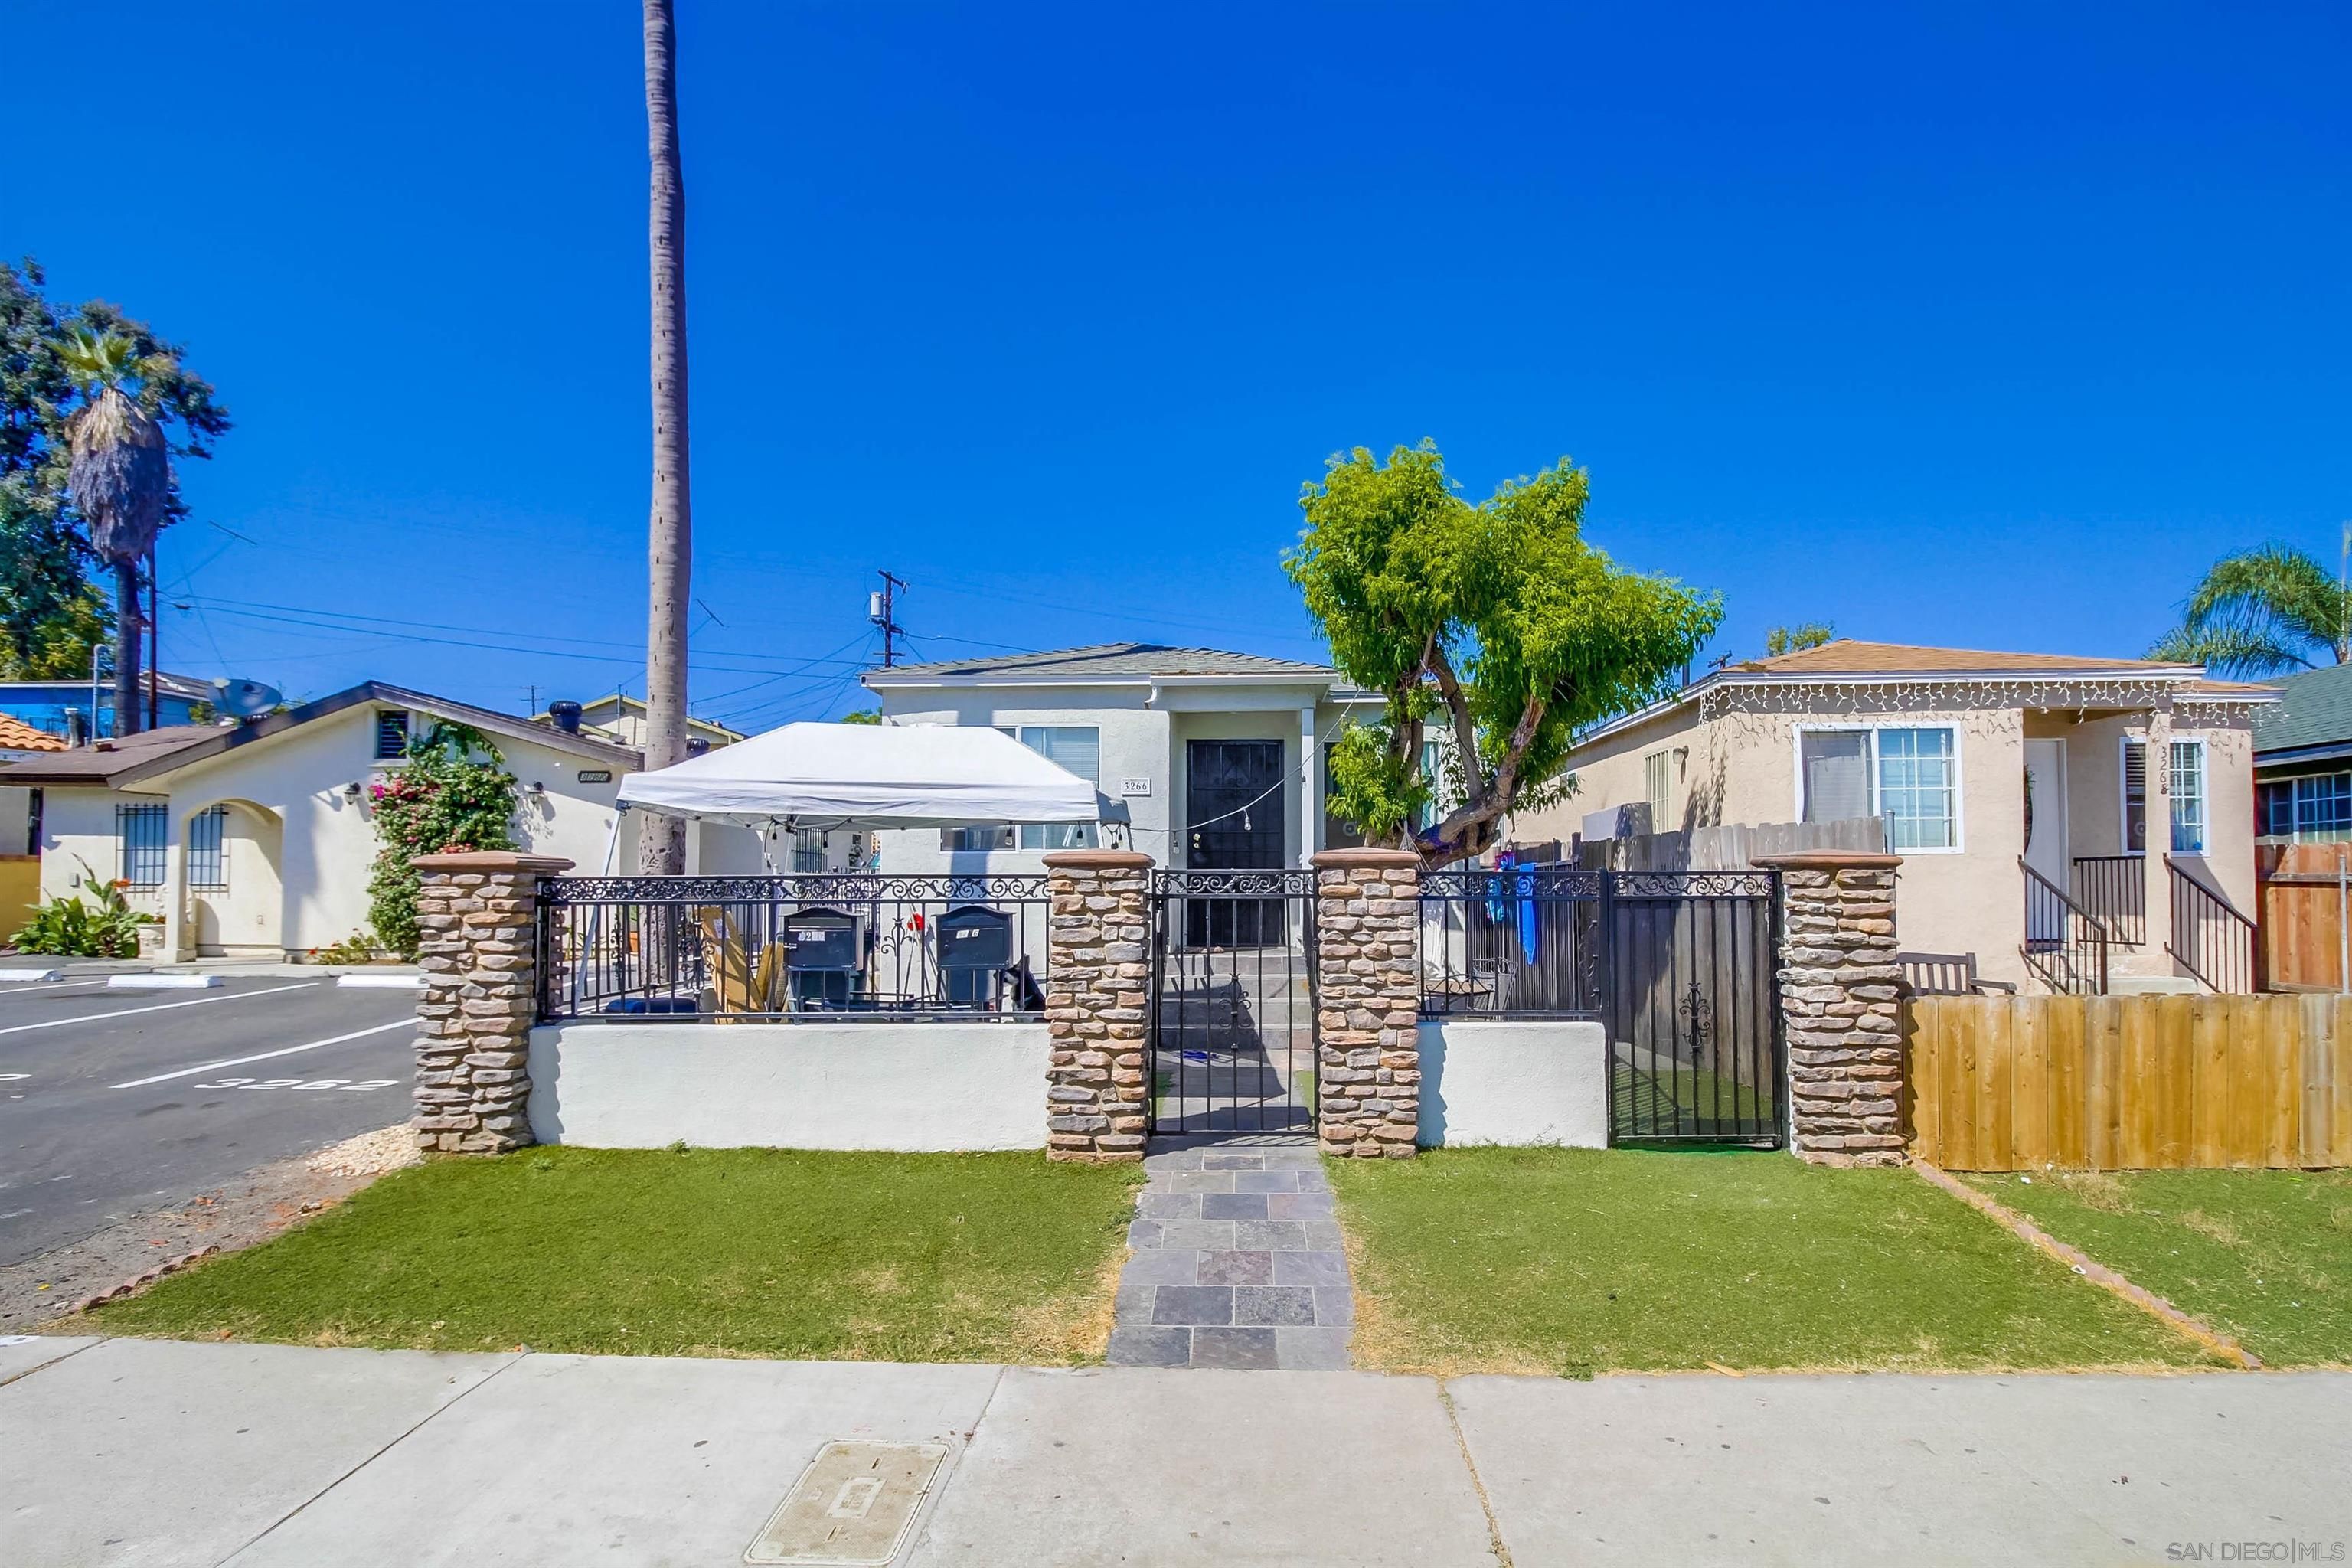 I have sold a property at 3266 J St in San Diego
